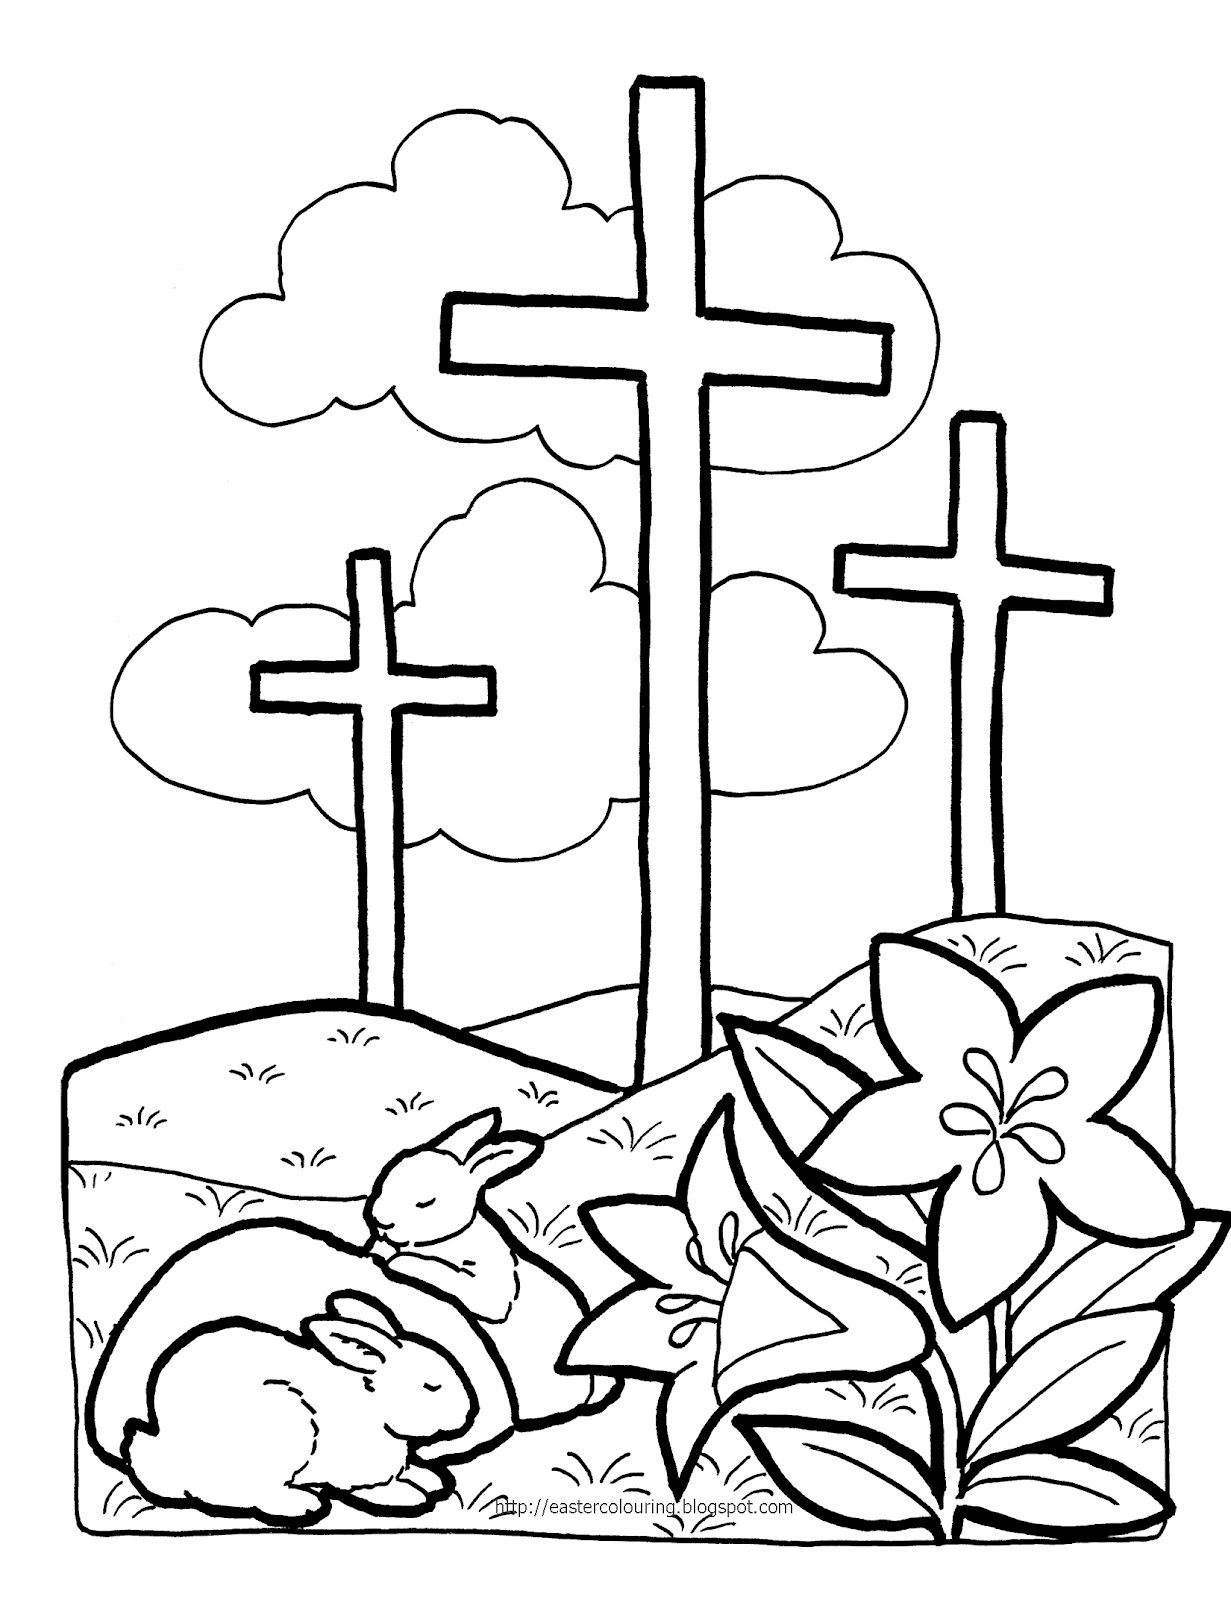 Free Printable Christian Coloring Pages For Kids - Best Coloring - Free Printable Christian Coloring Pages